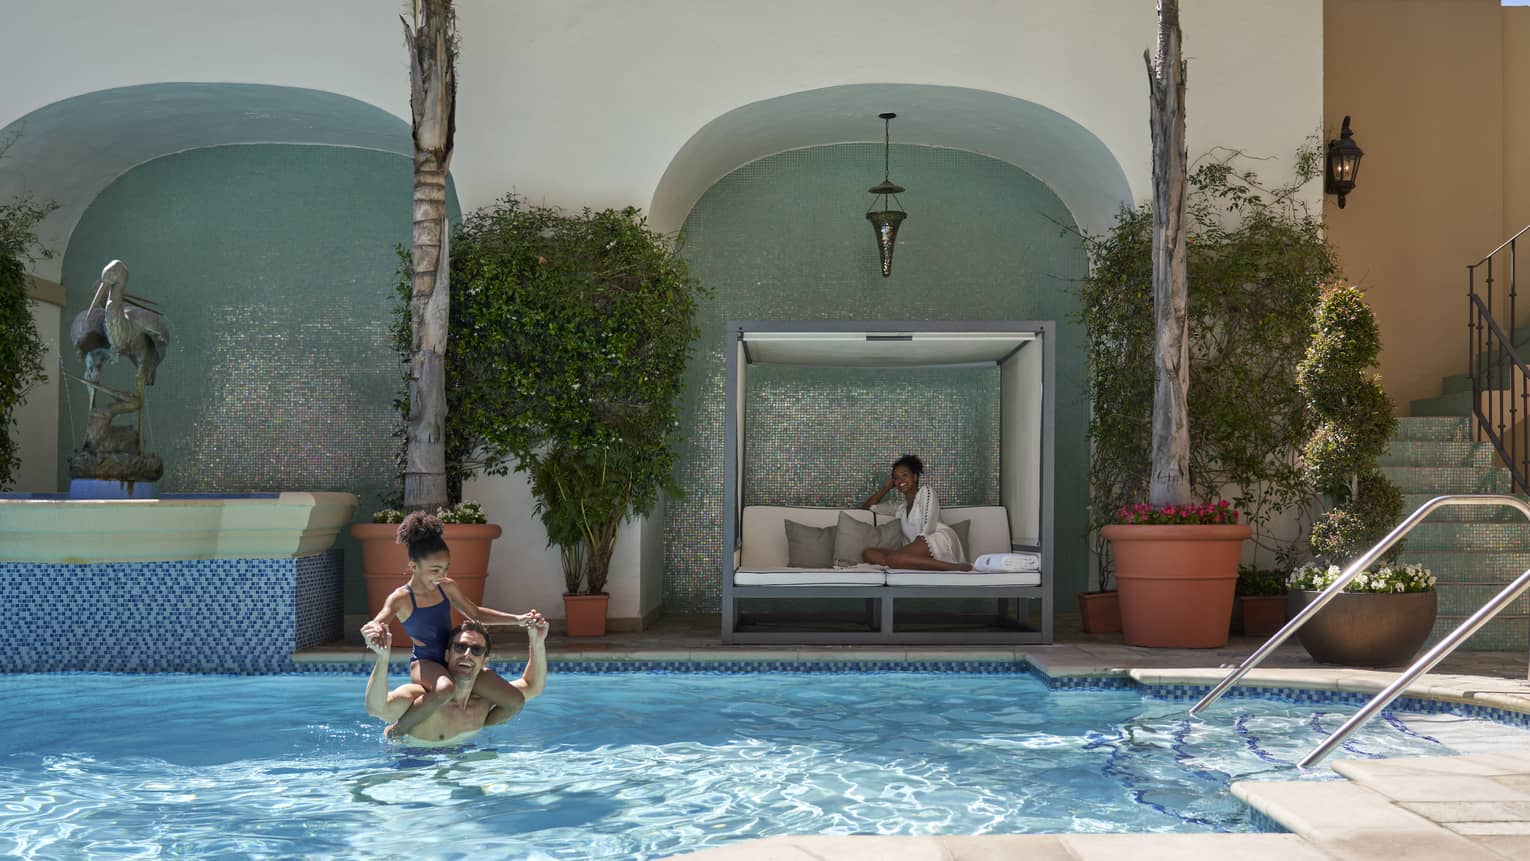 A father and daughter in the pool while a mother sits on a lounge chair.